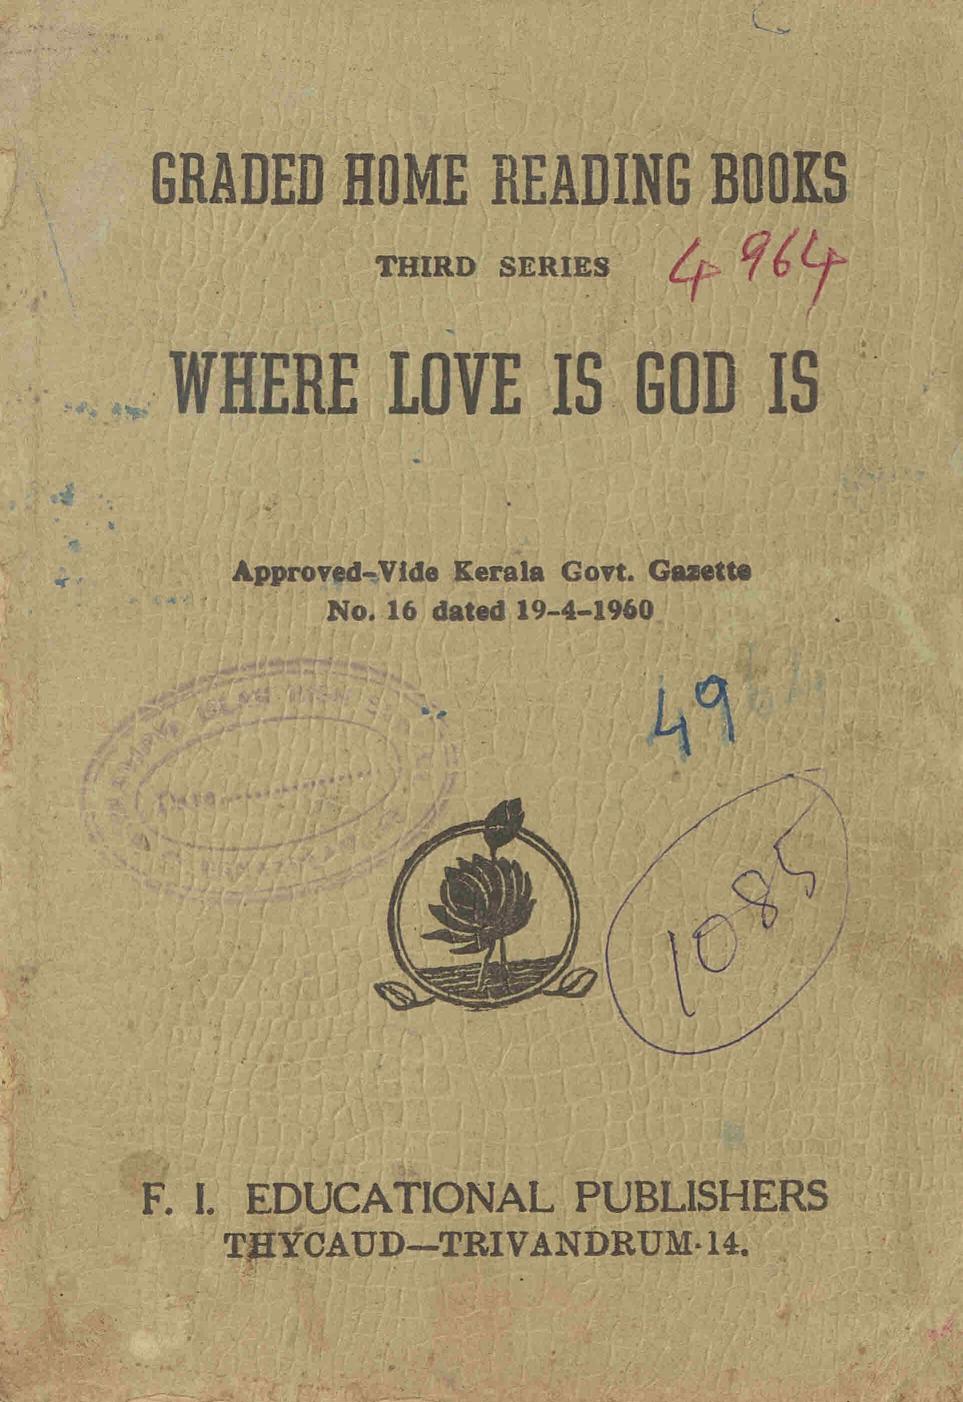  1963 - Where Love is God is - Leo Tolstoy